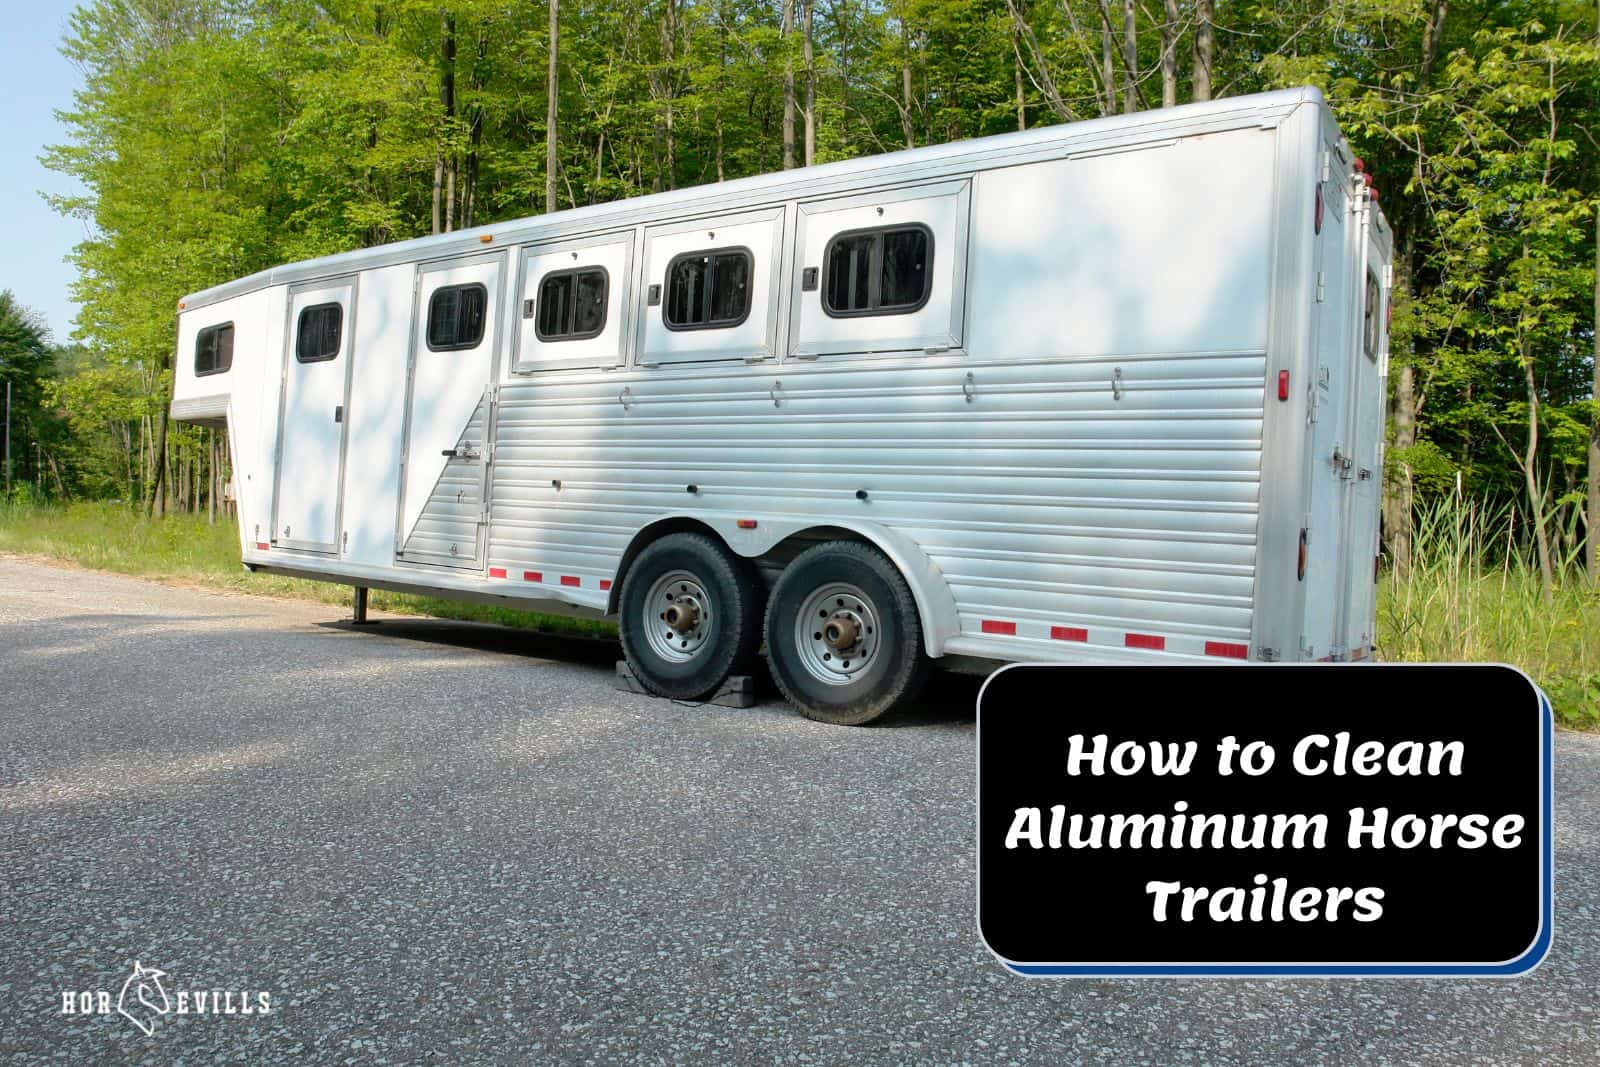 aluminum horse trailer on top of how to clean aluminum horse trailers text